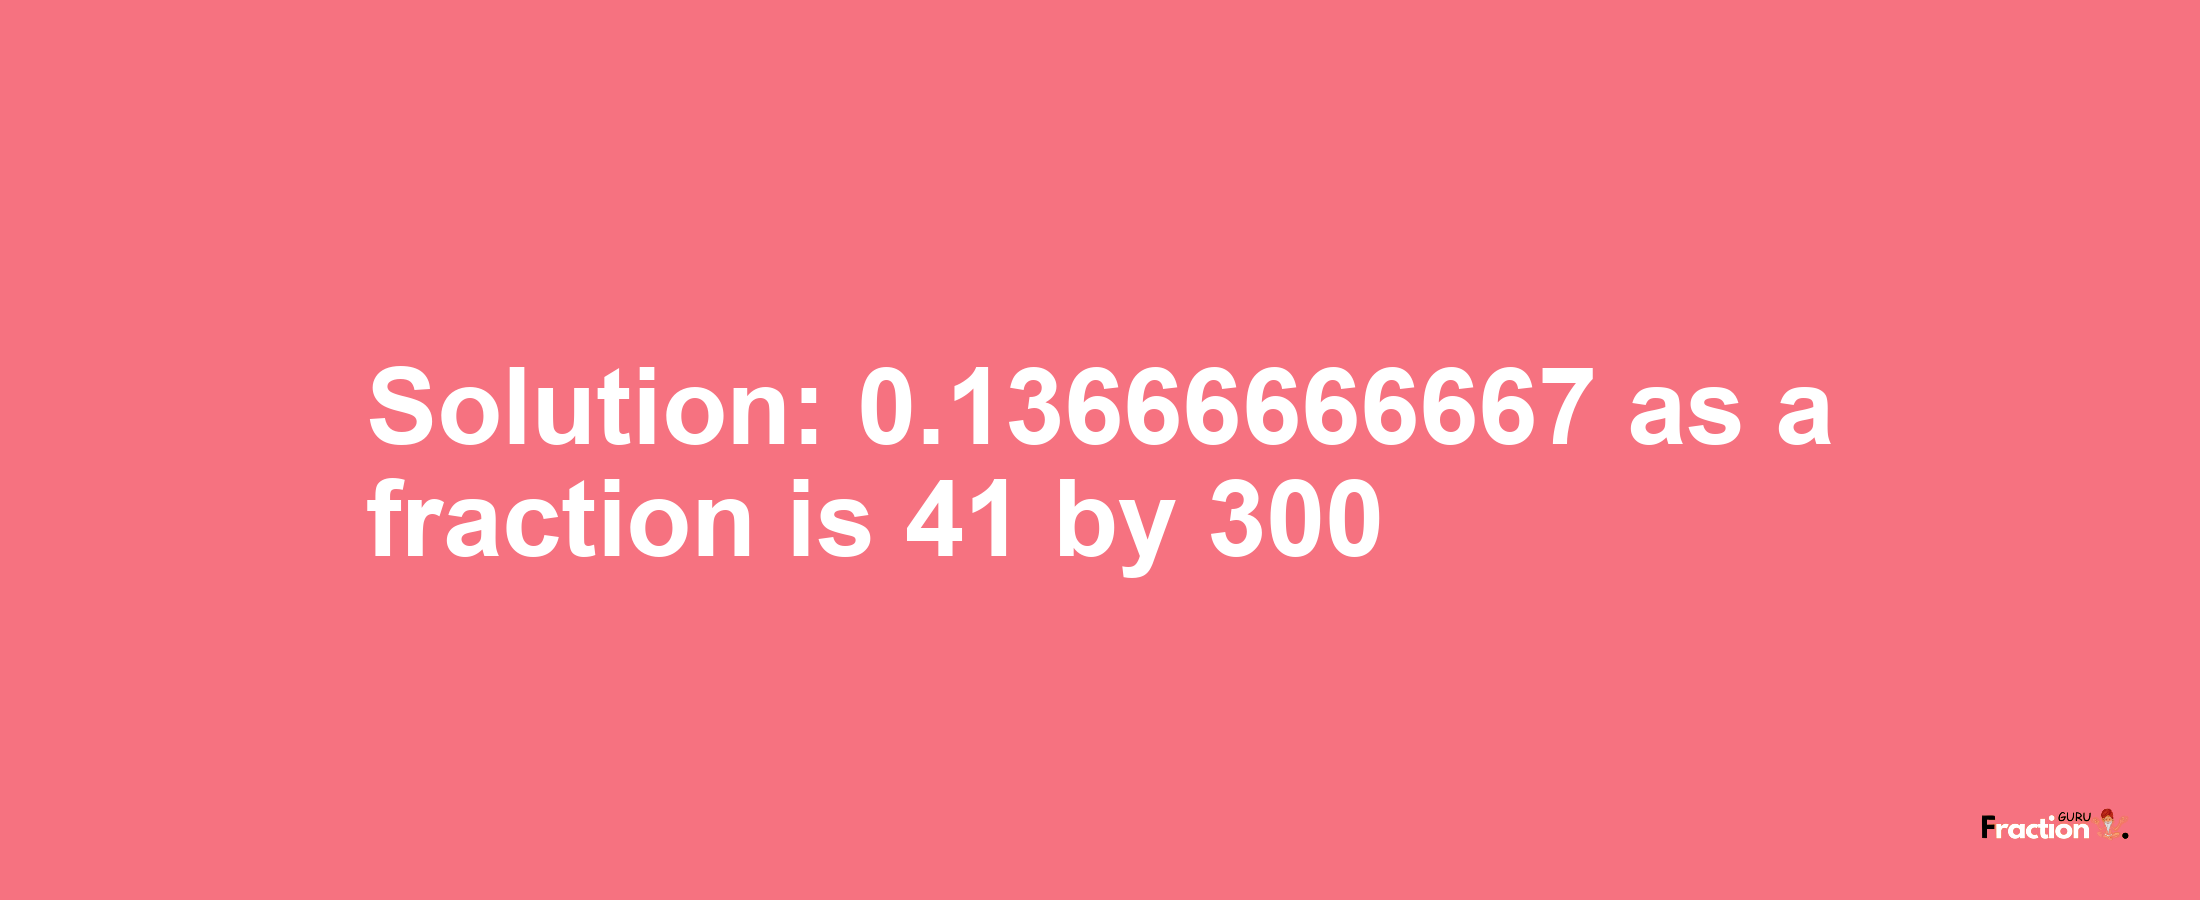 Solution:0.13666666667 as a fraction is 41/300